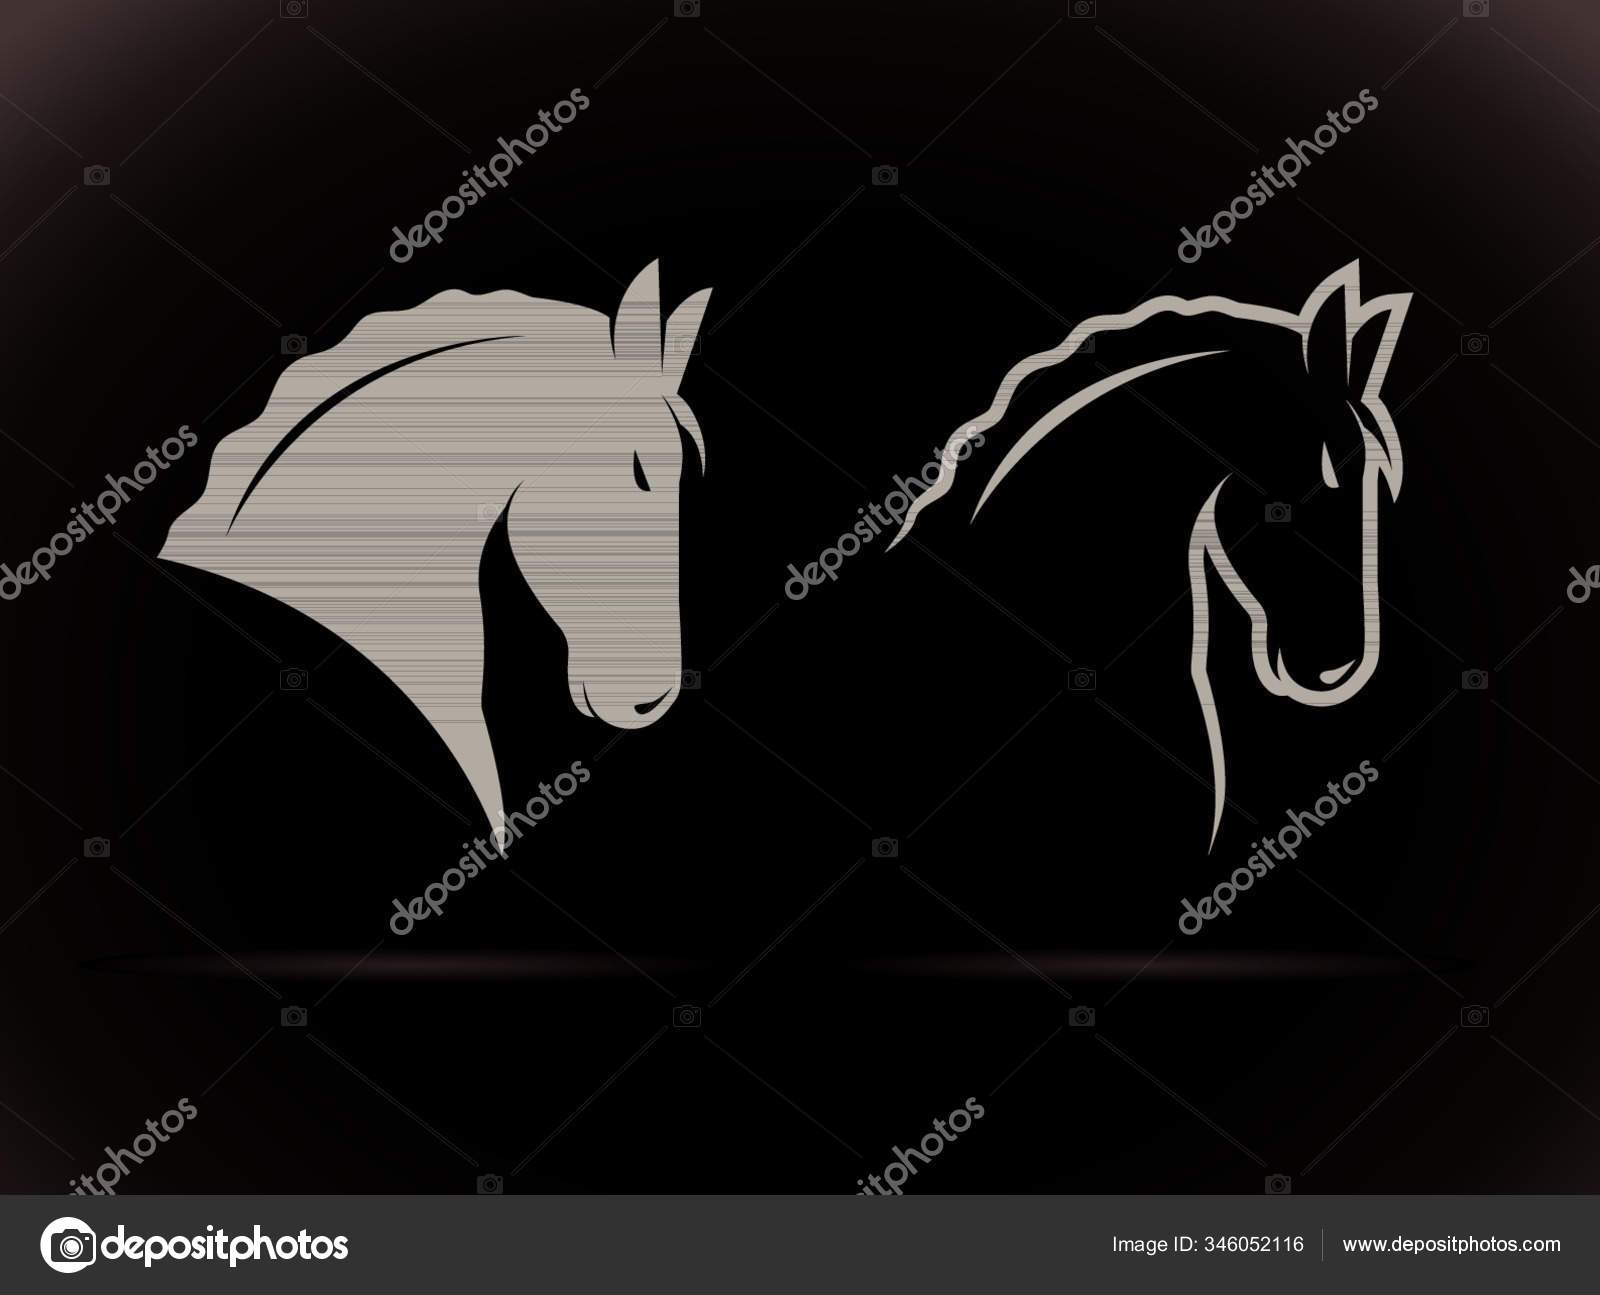 Vector of a horse head on white background. Wild Animal